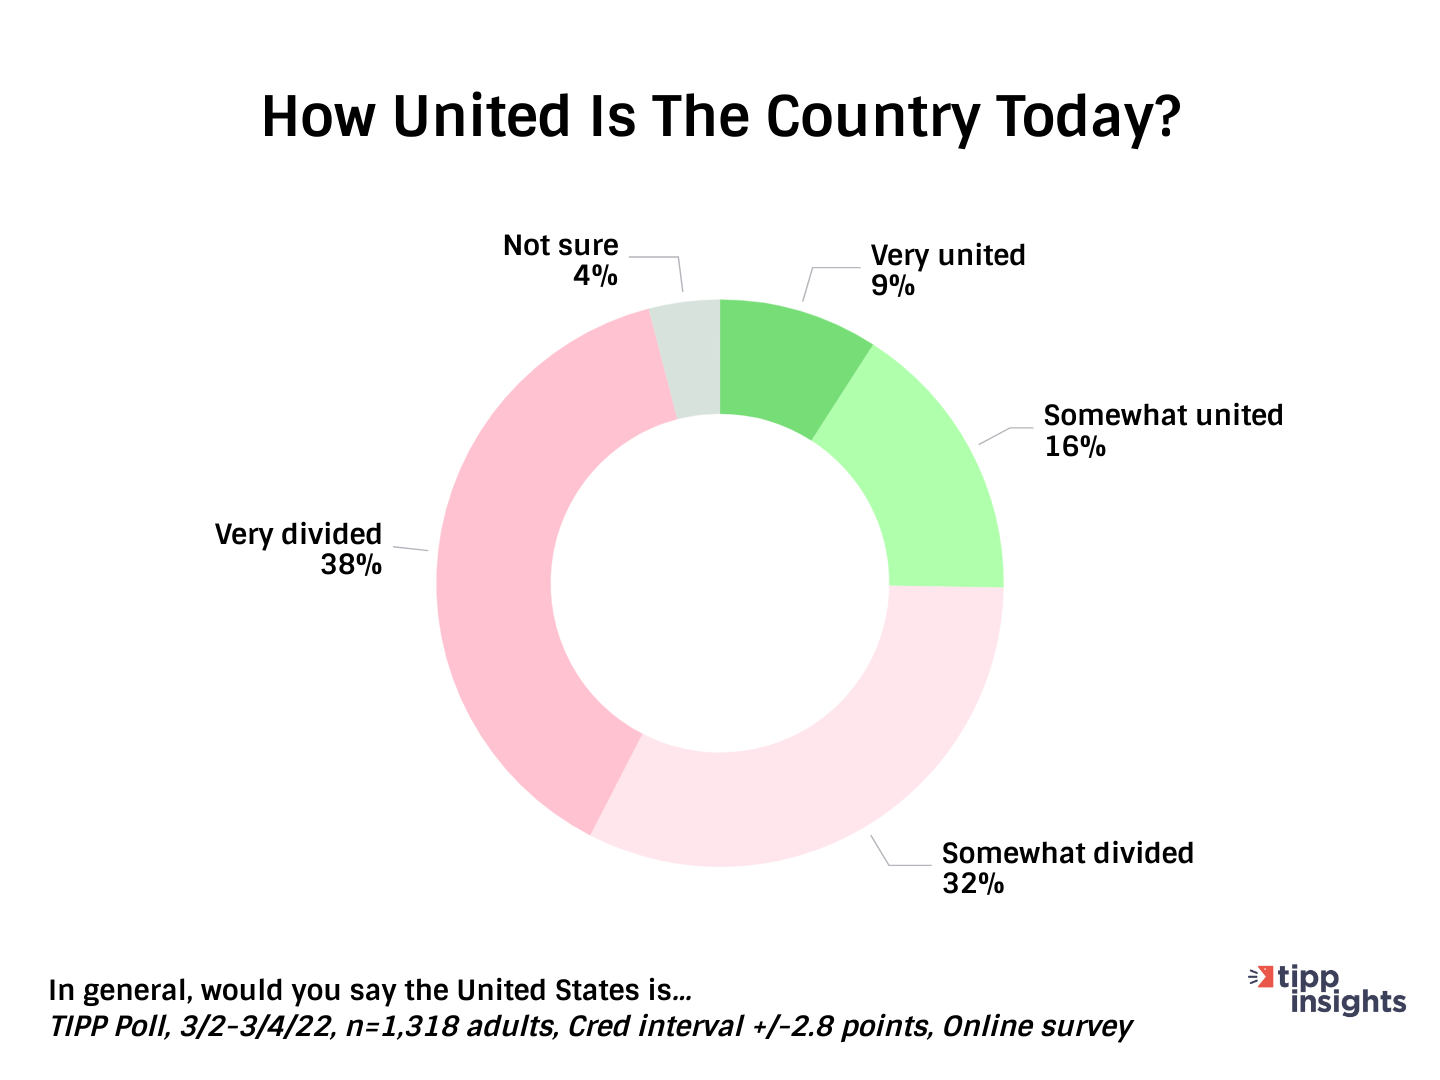 How united is the country today?